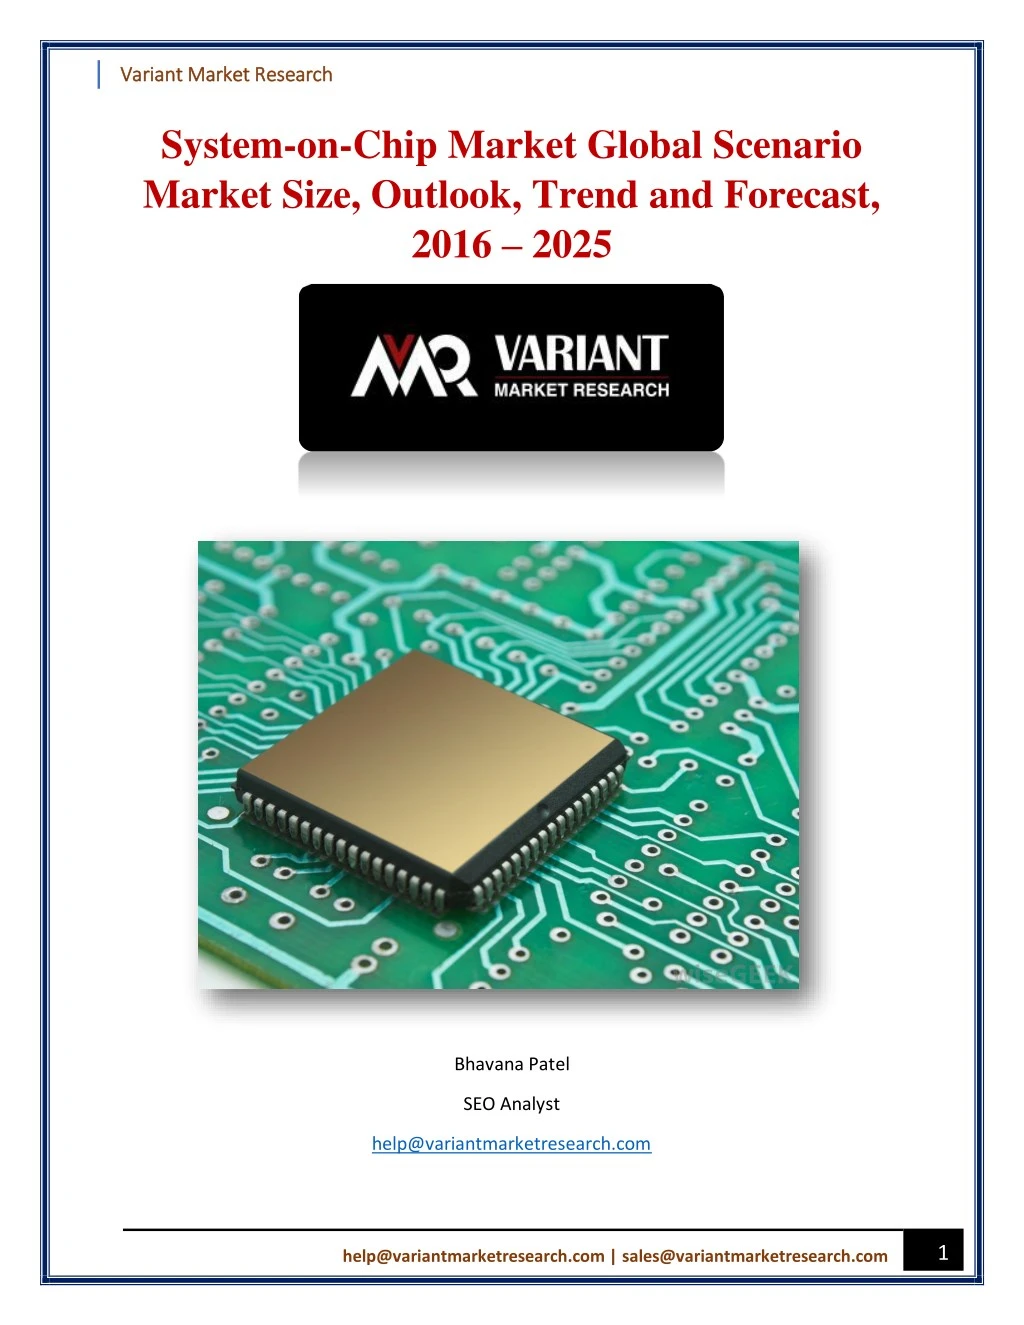 varian variant market research t market research